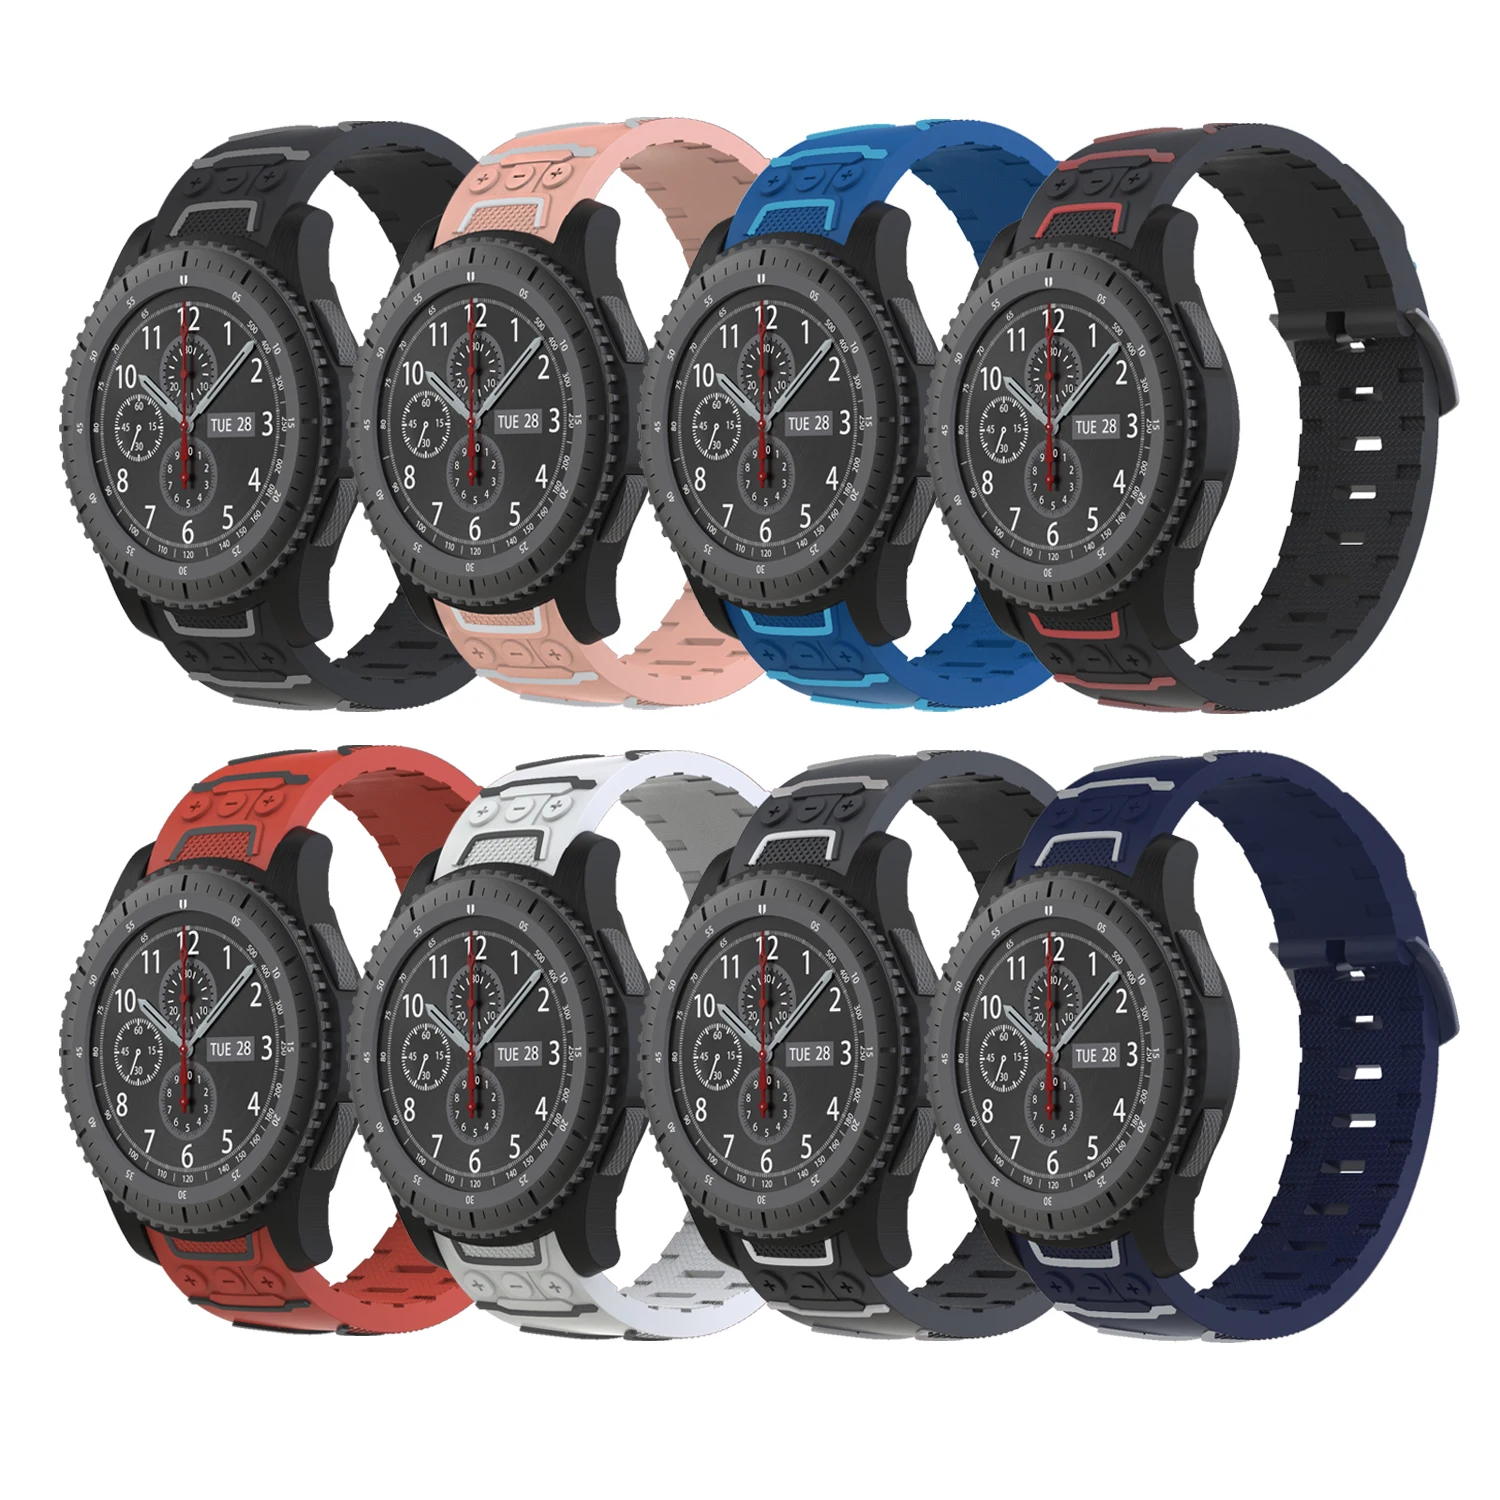 

22mm Strap For Samsung Gear sport S2 S3 Frontier Classic watch Band huami amazfit 1 2 pace bip huawei watch 1 2 classic bracelet